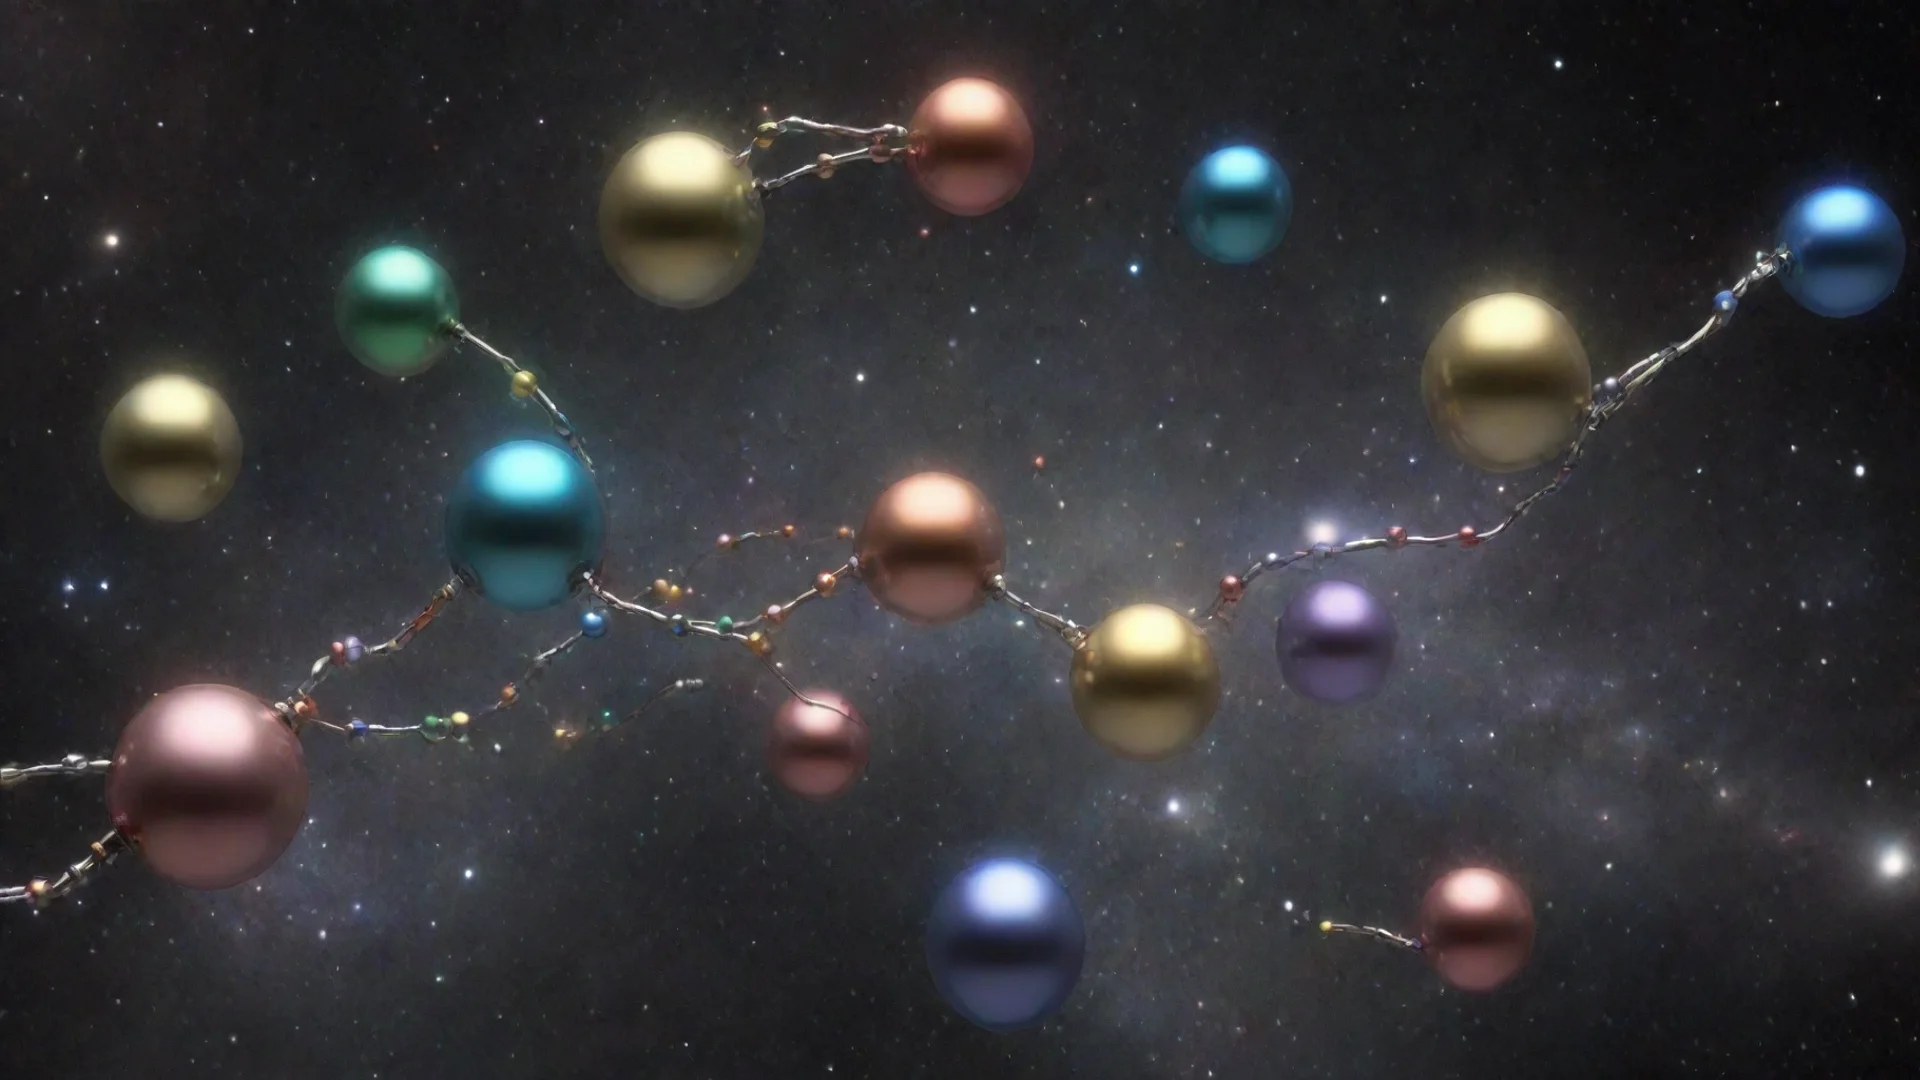 aiamazing metallic multicolored spheres distributed in space and linked by irridescent tubes. awesome portrait 2 wide